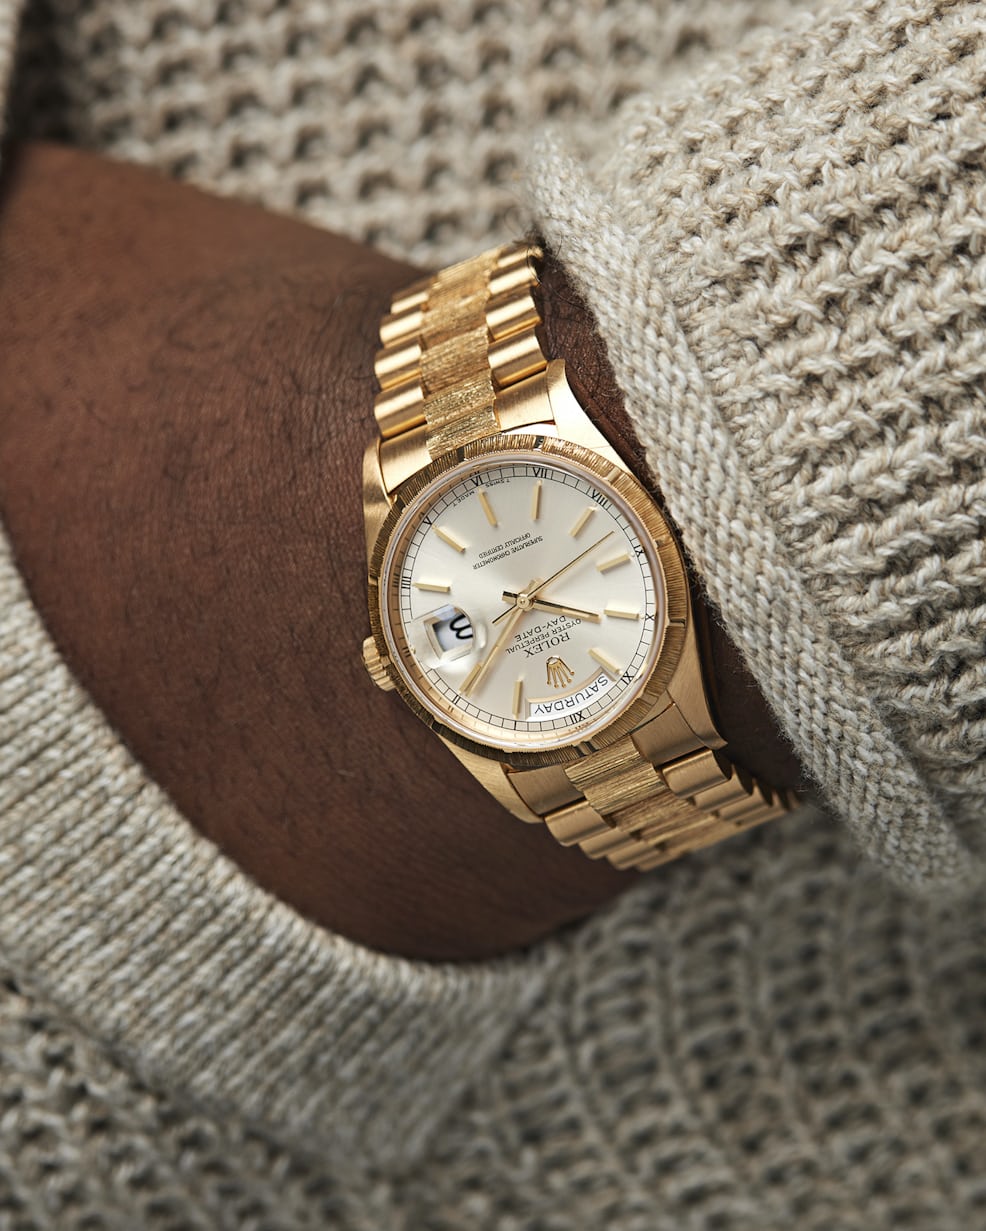 Vintage Watches In The HODINKEE